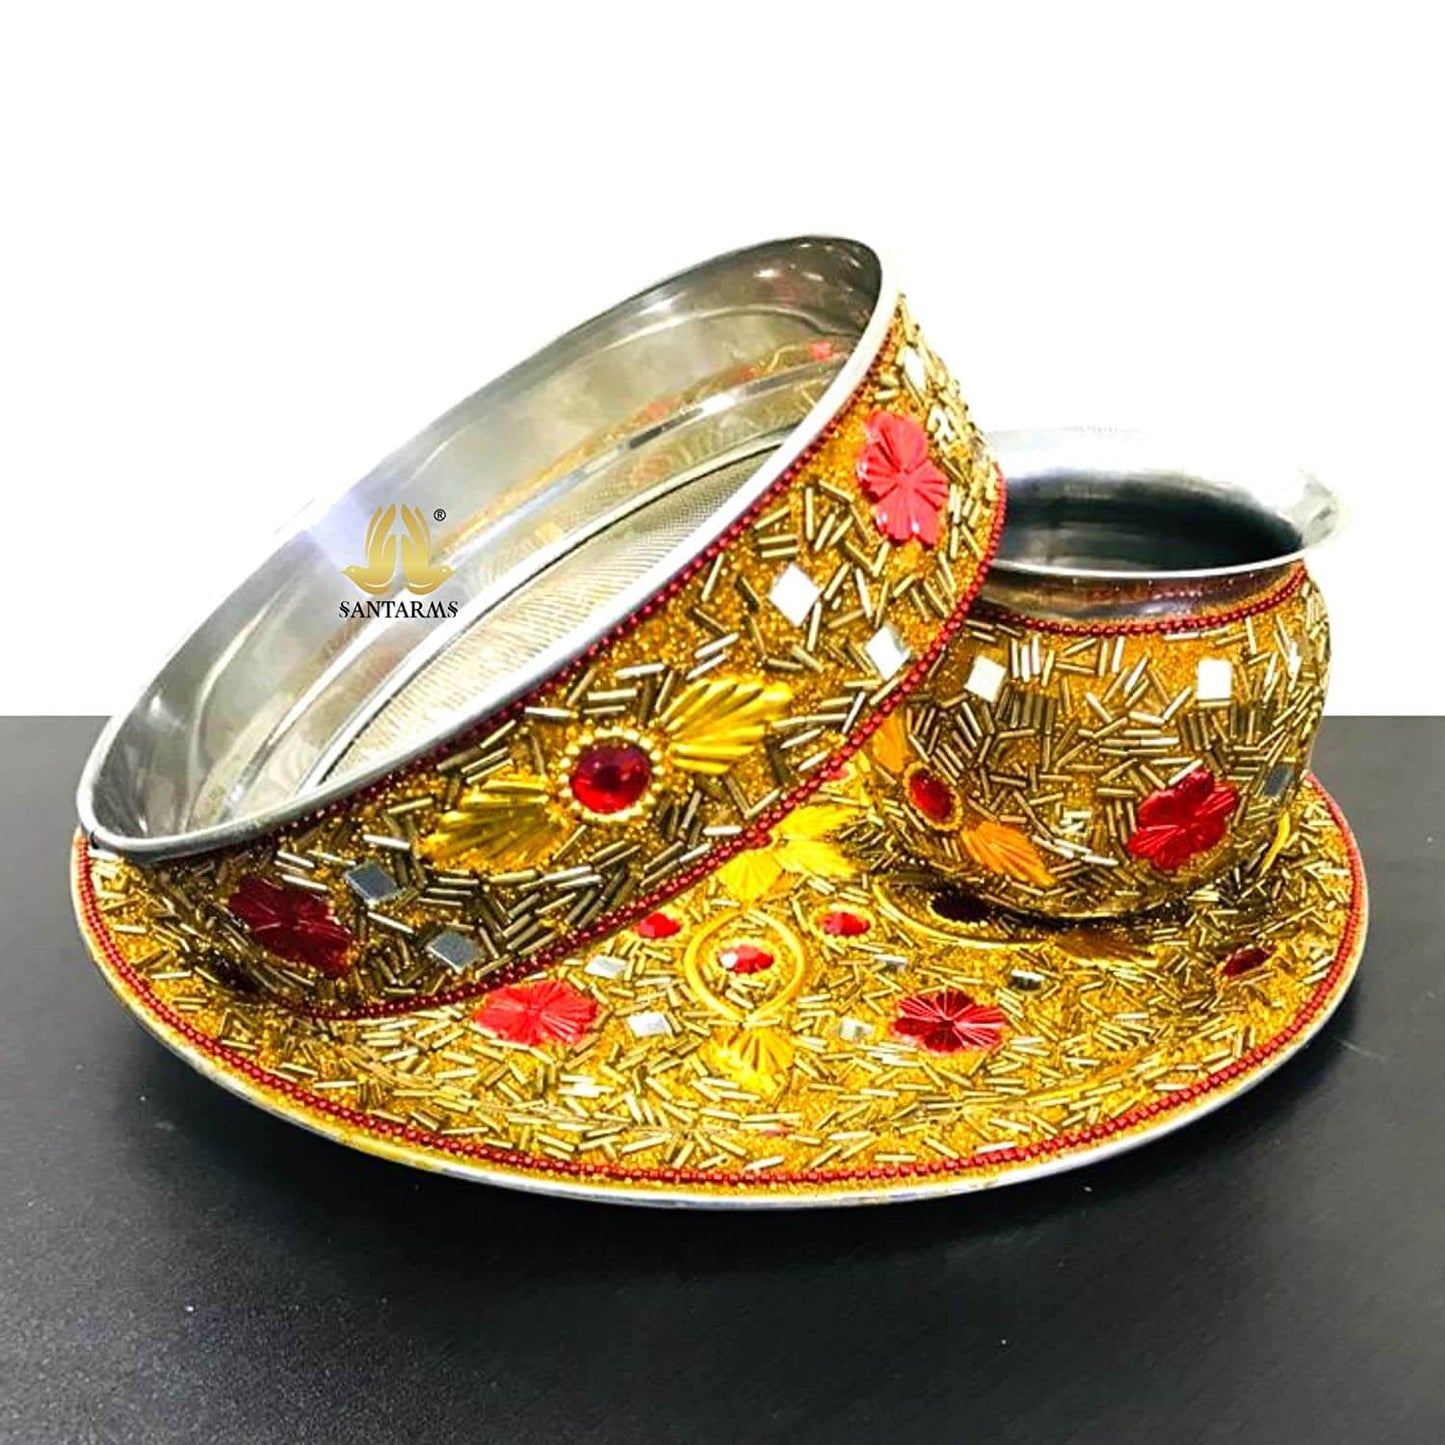 Karva Chauth Pooja Thali Set for Wife, Daughter-in-law, Mother-in-law for Wedding, Diwali Gifts, Varalakshmi, pooja, Festive Gifts Mangal Fashions | Indian Home Decor and Craft